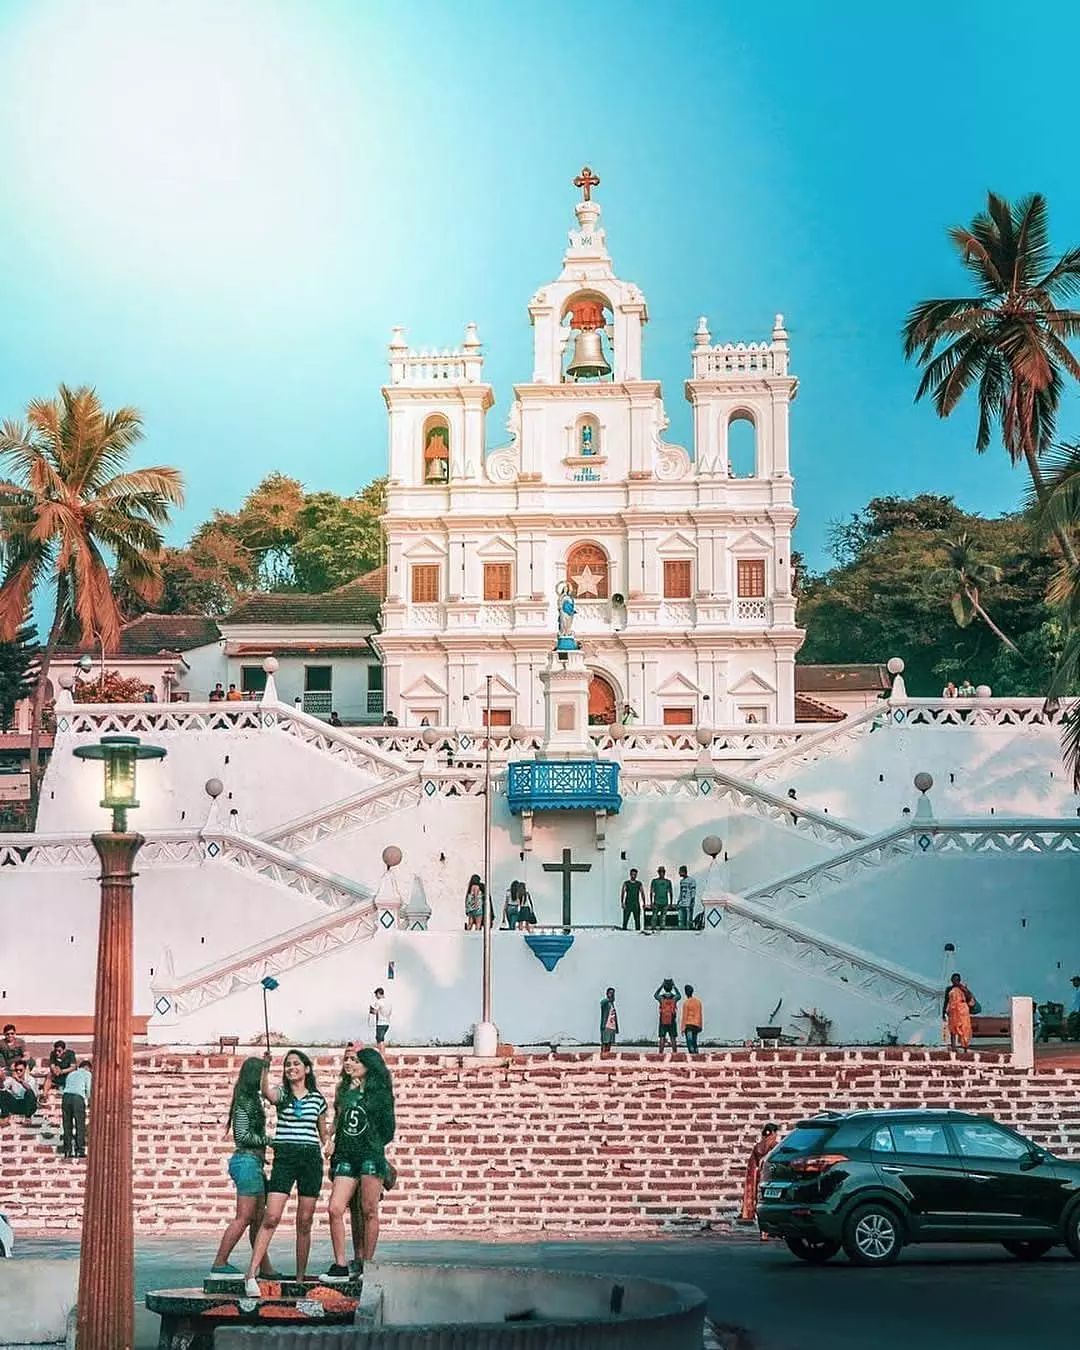 Best Places To Visit In Goa - Our Lady of the Immaculate Conception Church